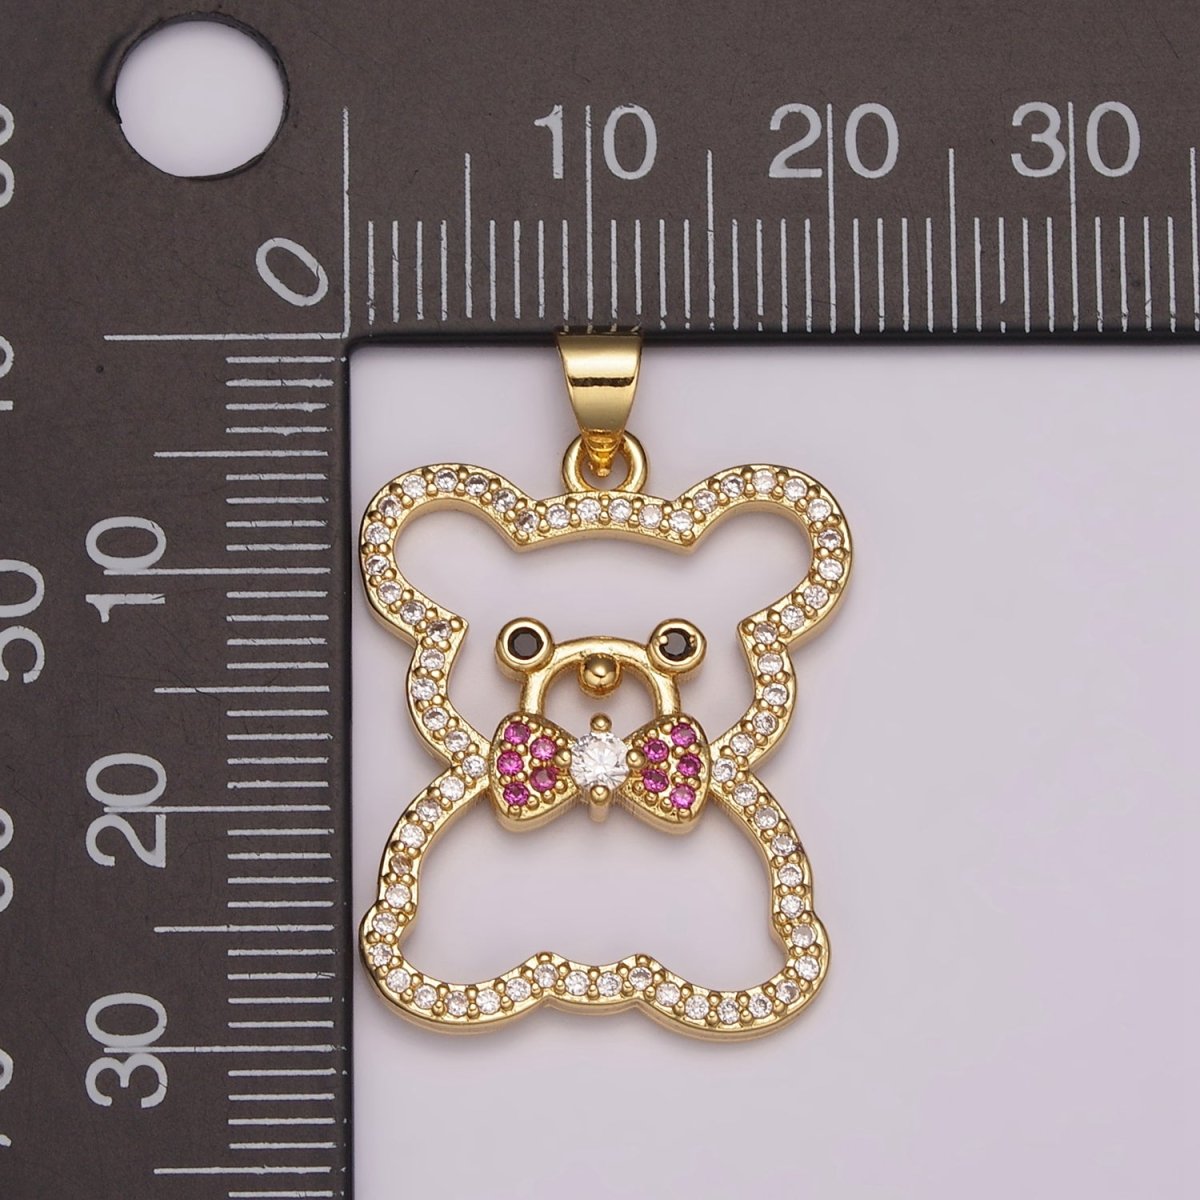 24K Gold Filled Micro Pave Gold Bear Charm Teddy Bear Charm Necklace Pendant / Keychain / Earrings / Kids Crafts N-1486 - DLUXCA